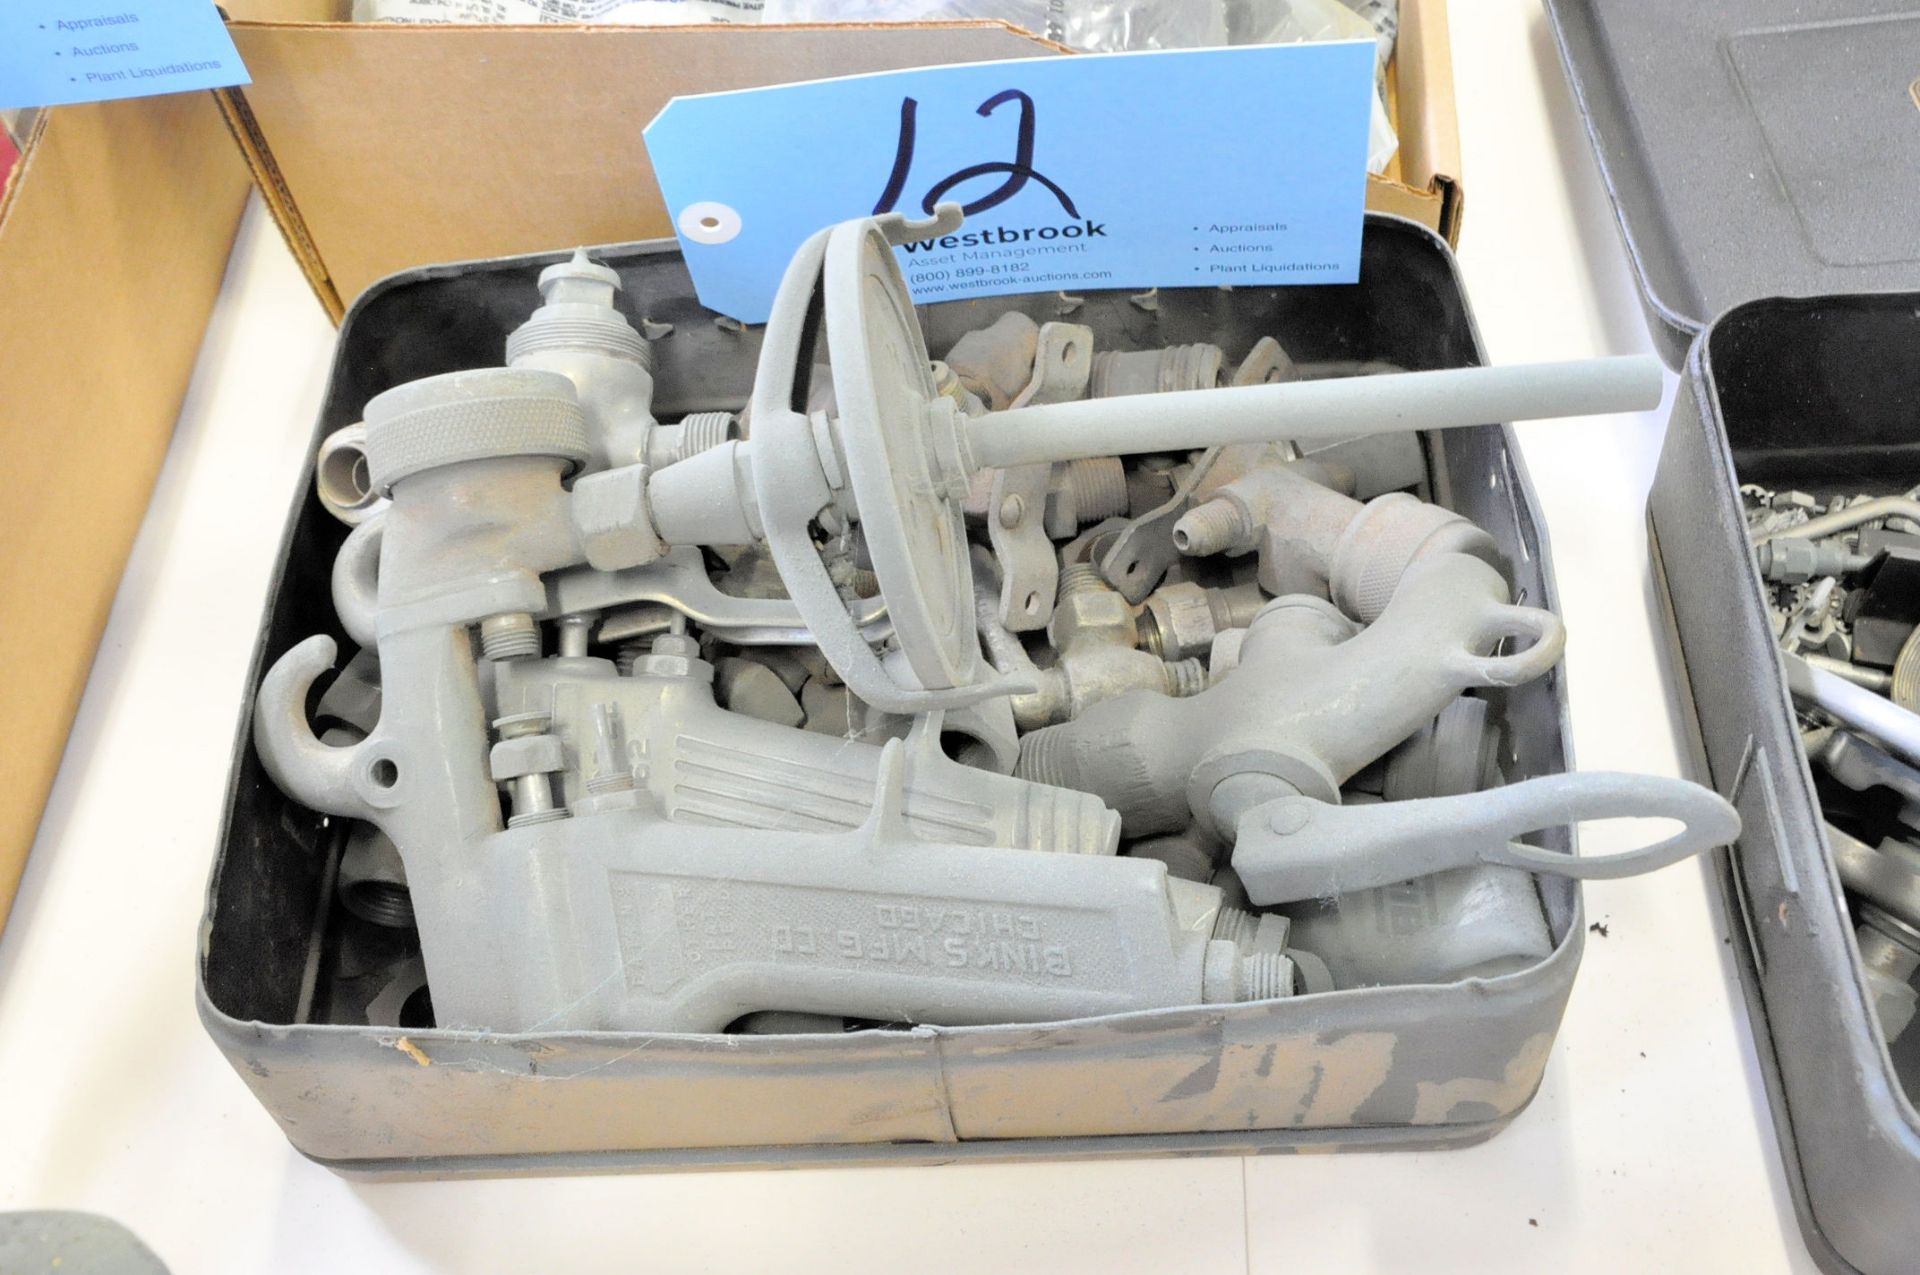 Lot-Pneumatic Paint Spray Guns, Strainers, Parts, Etc. in (6) Boxes - Image 4 of 5